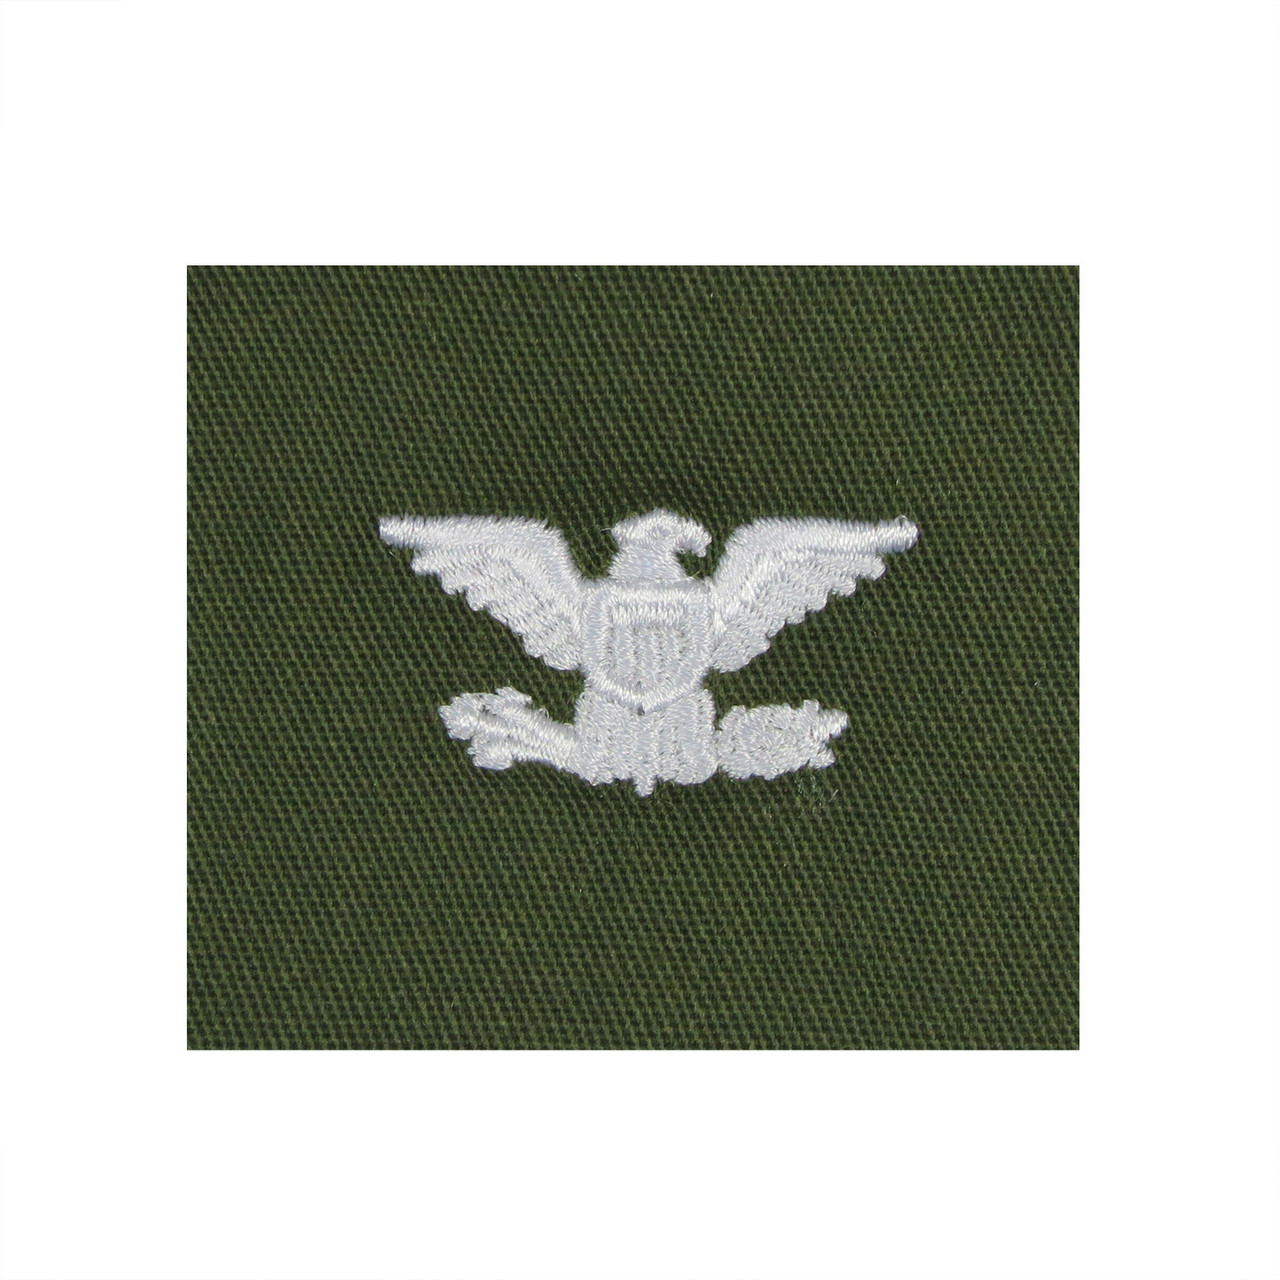 Army Officer Sew on Rank Insignia   Color